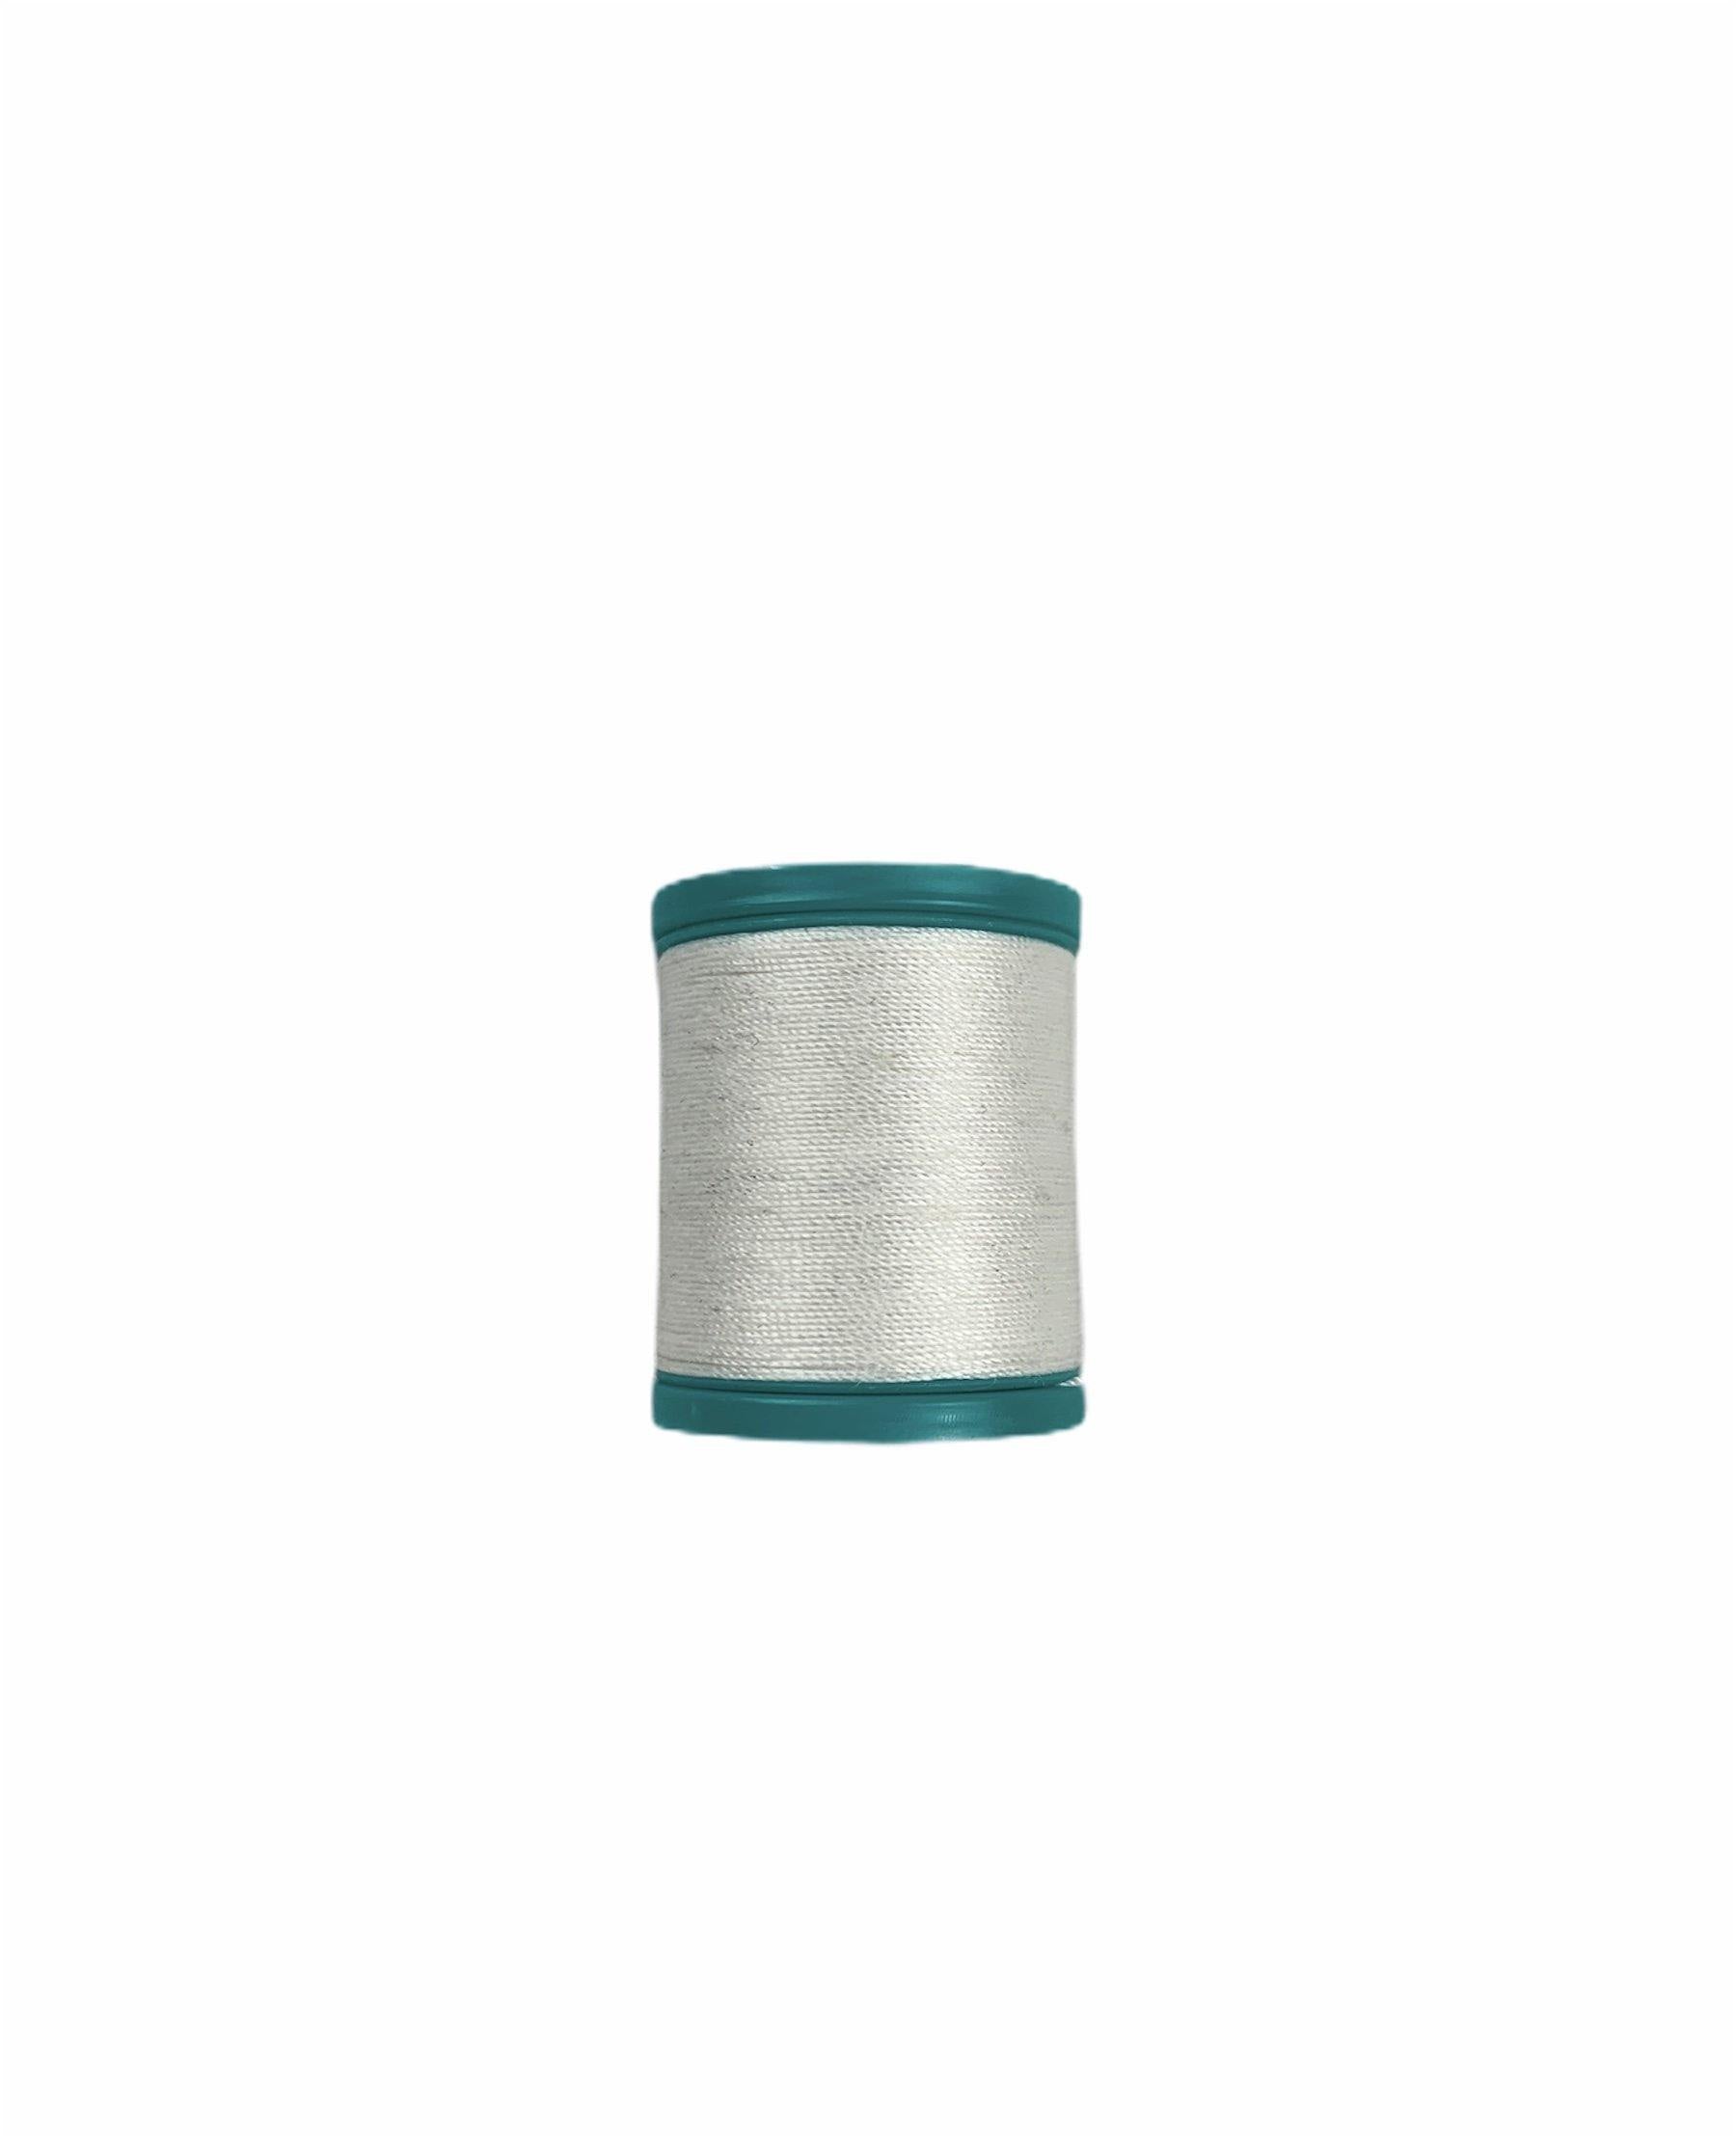 Sewing Thread Clear Invisible Transparent Thread Perfect Match Thread 435  Yards Plastic String Upholstery Thread Heavy Duty Sewing Threads for Sewing